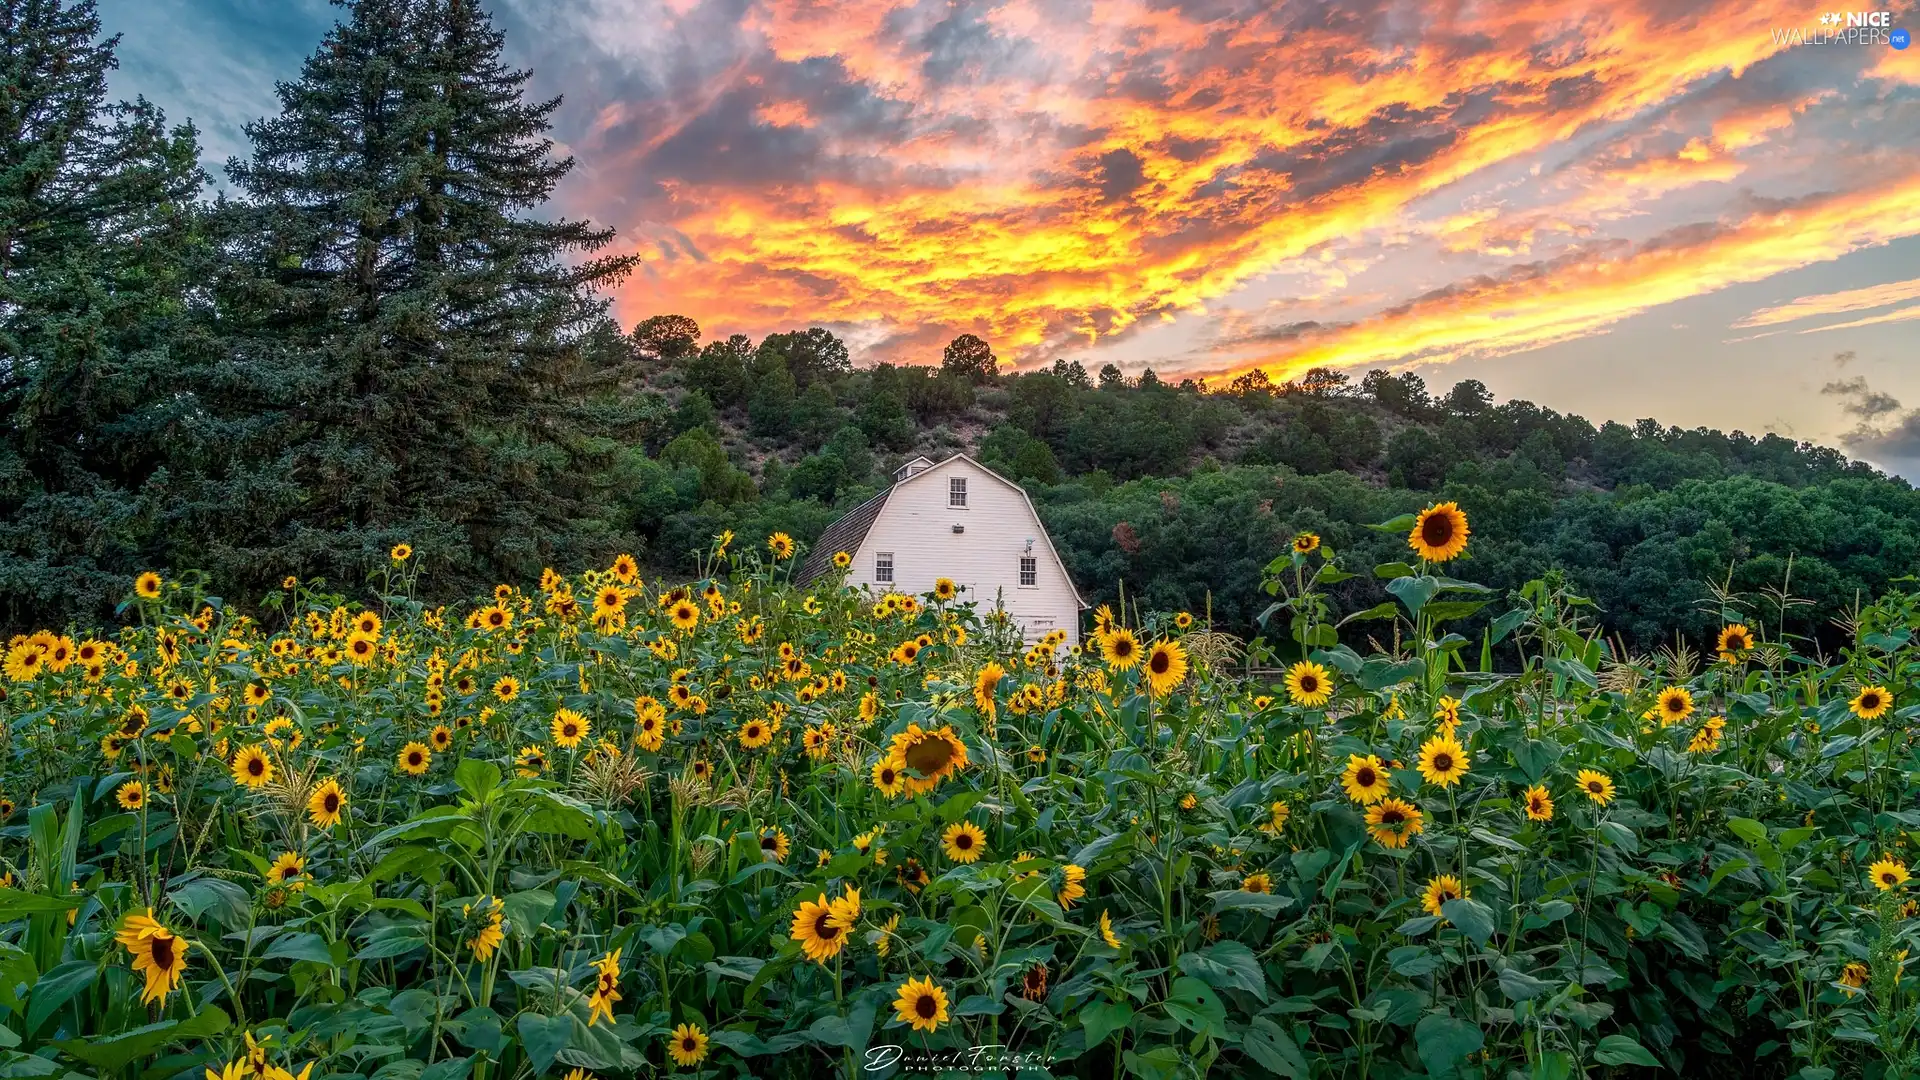 forest, Nice sunflowers, viewes, Great Sunsets, trees, house